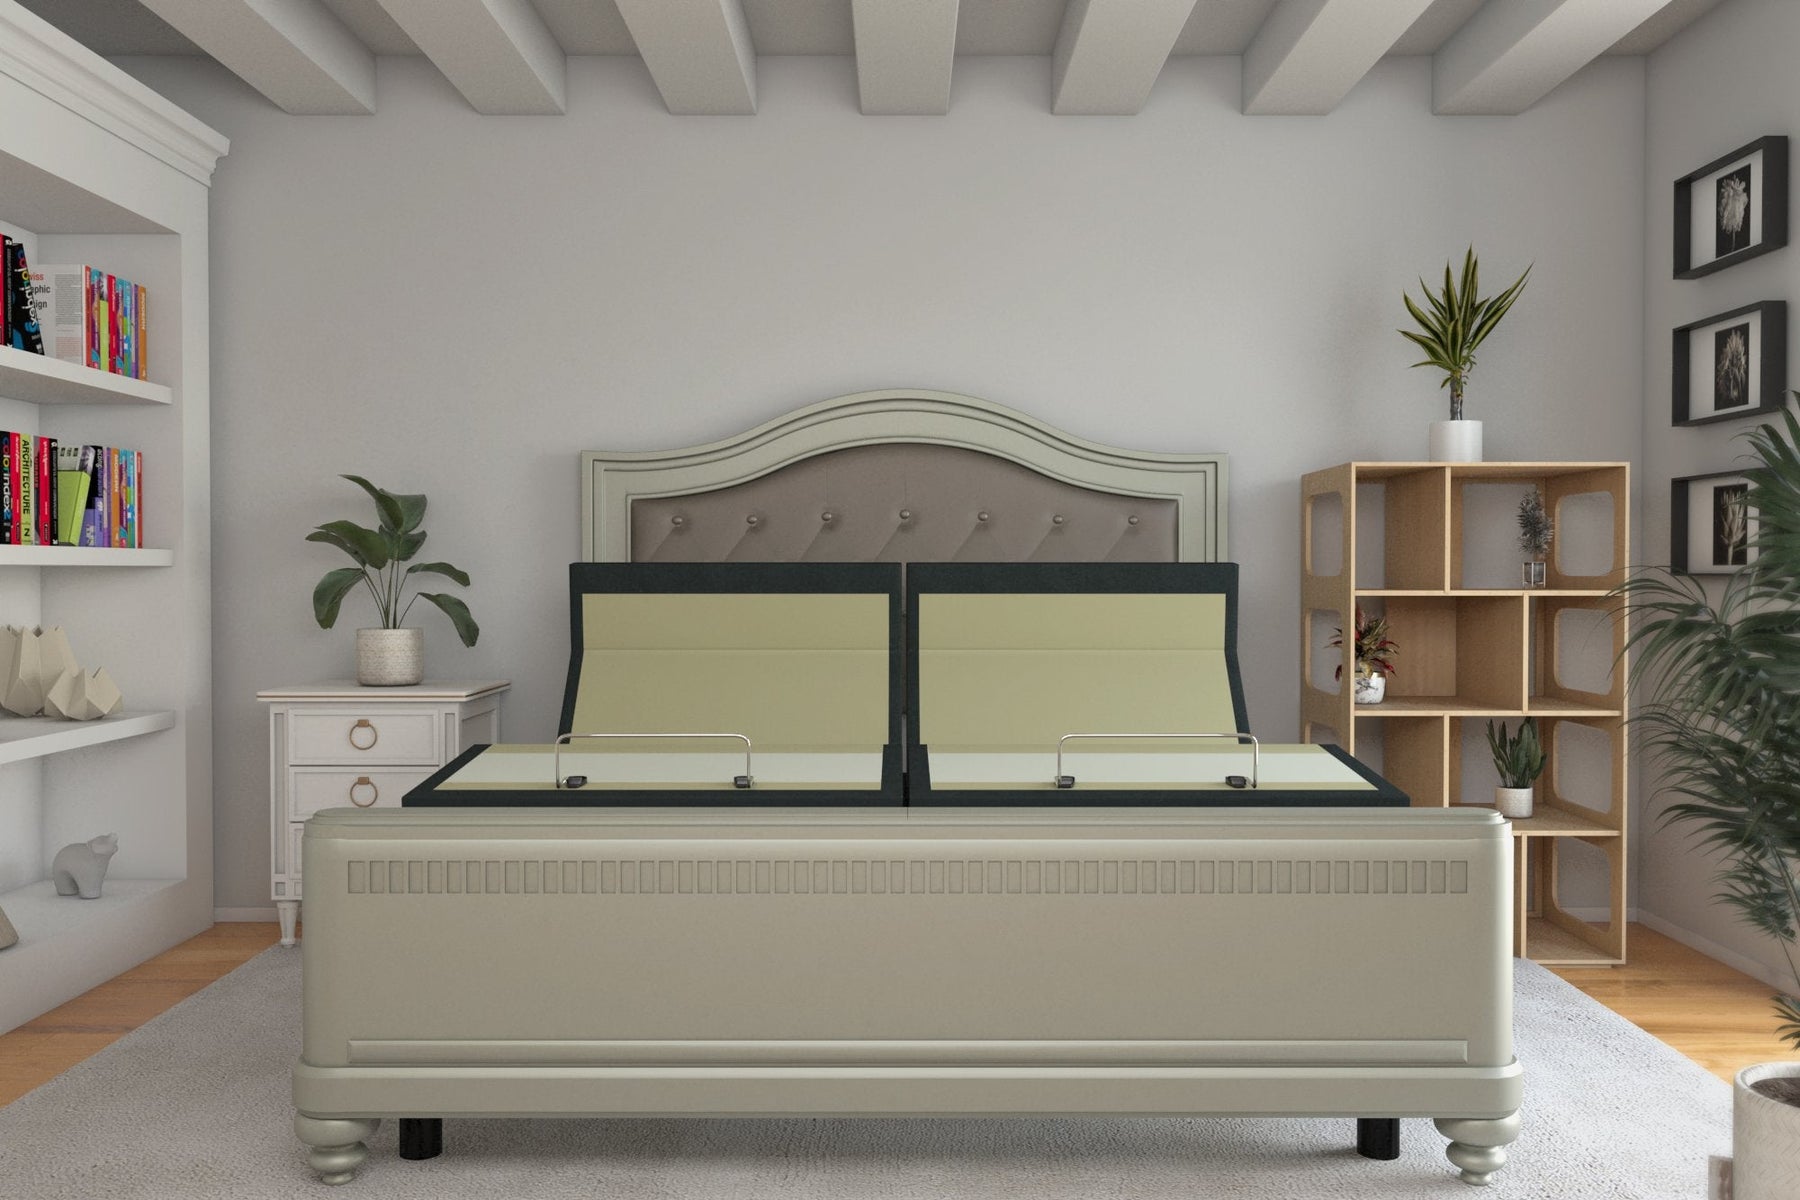 Choosing The Right Mattress For Your Needs